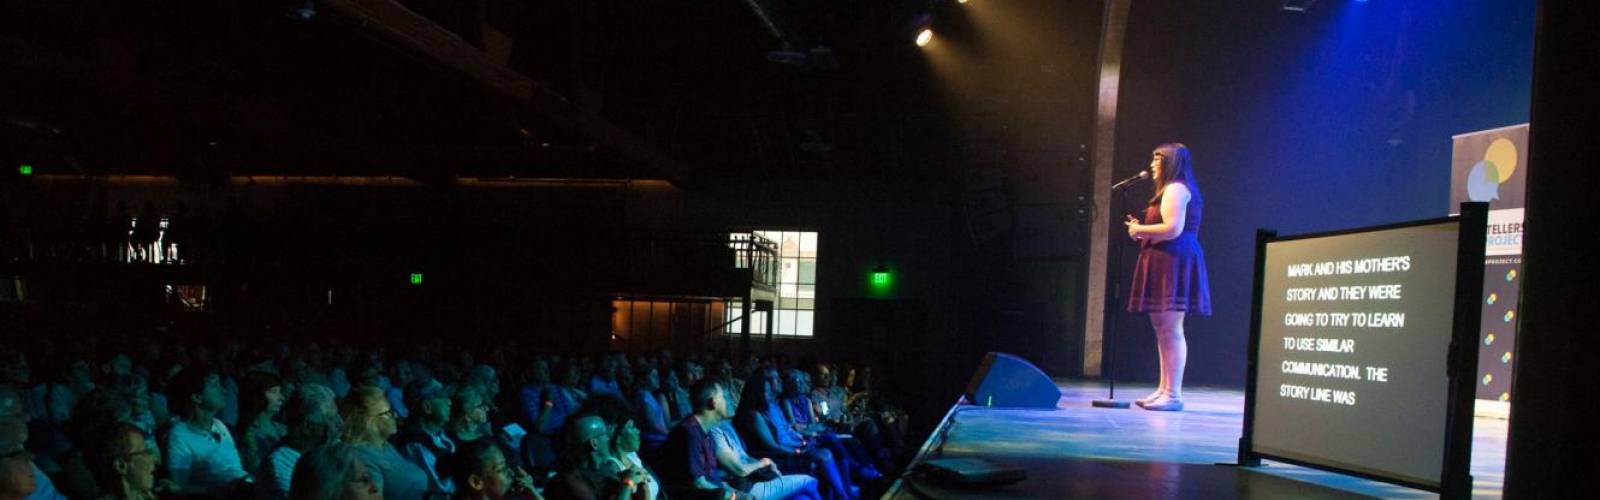 Join Us and Relate to Other Stories of Growing Up During Arizona Storytellers